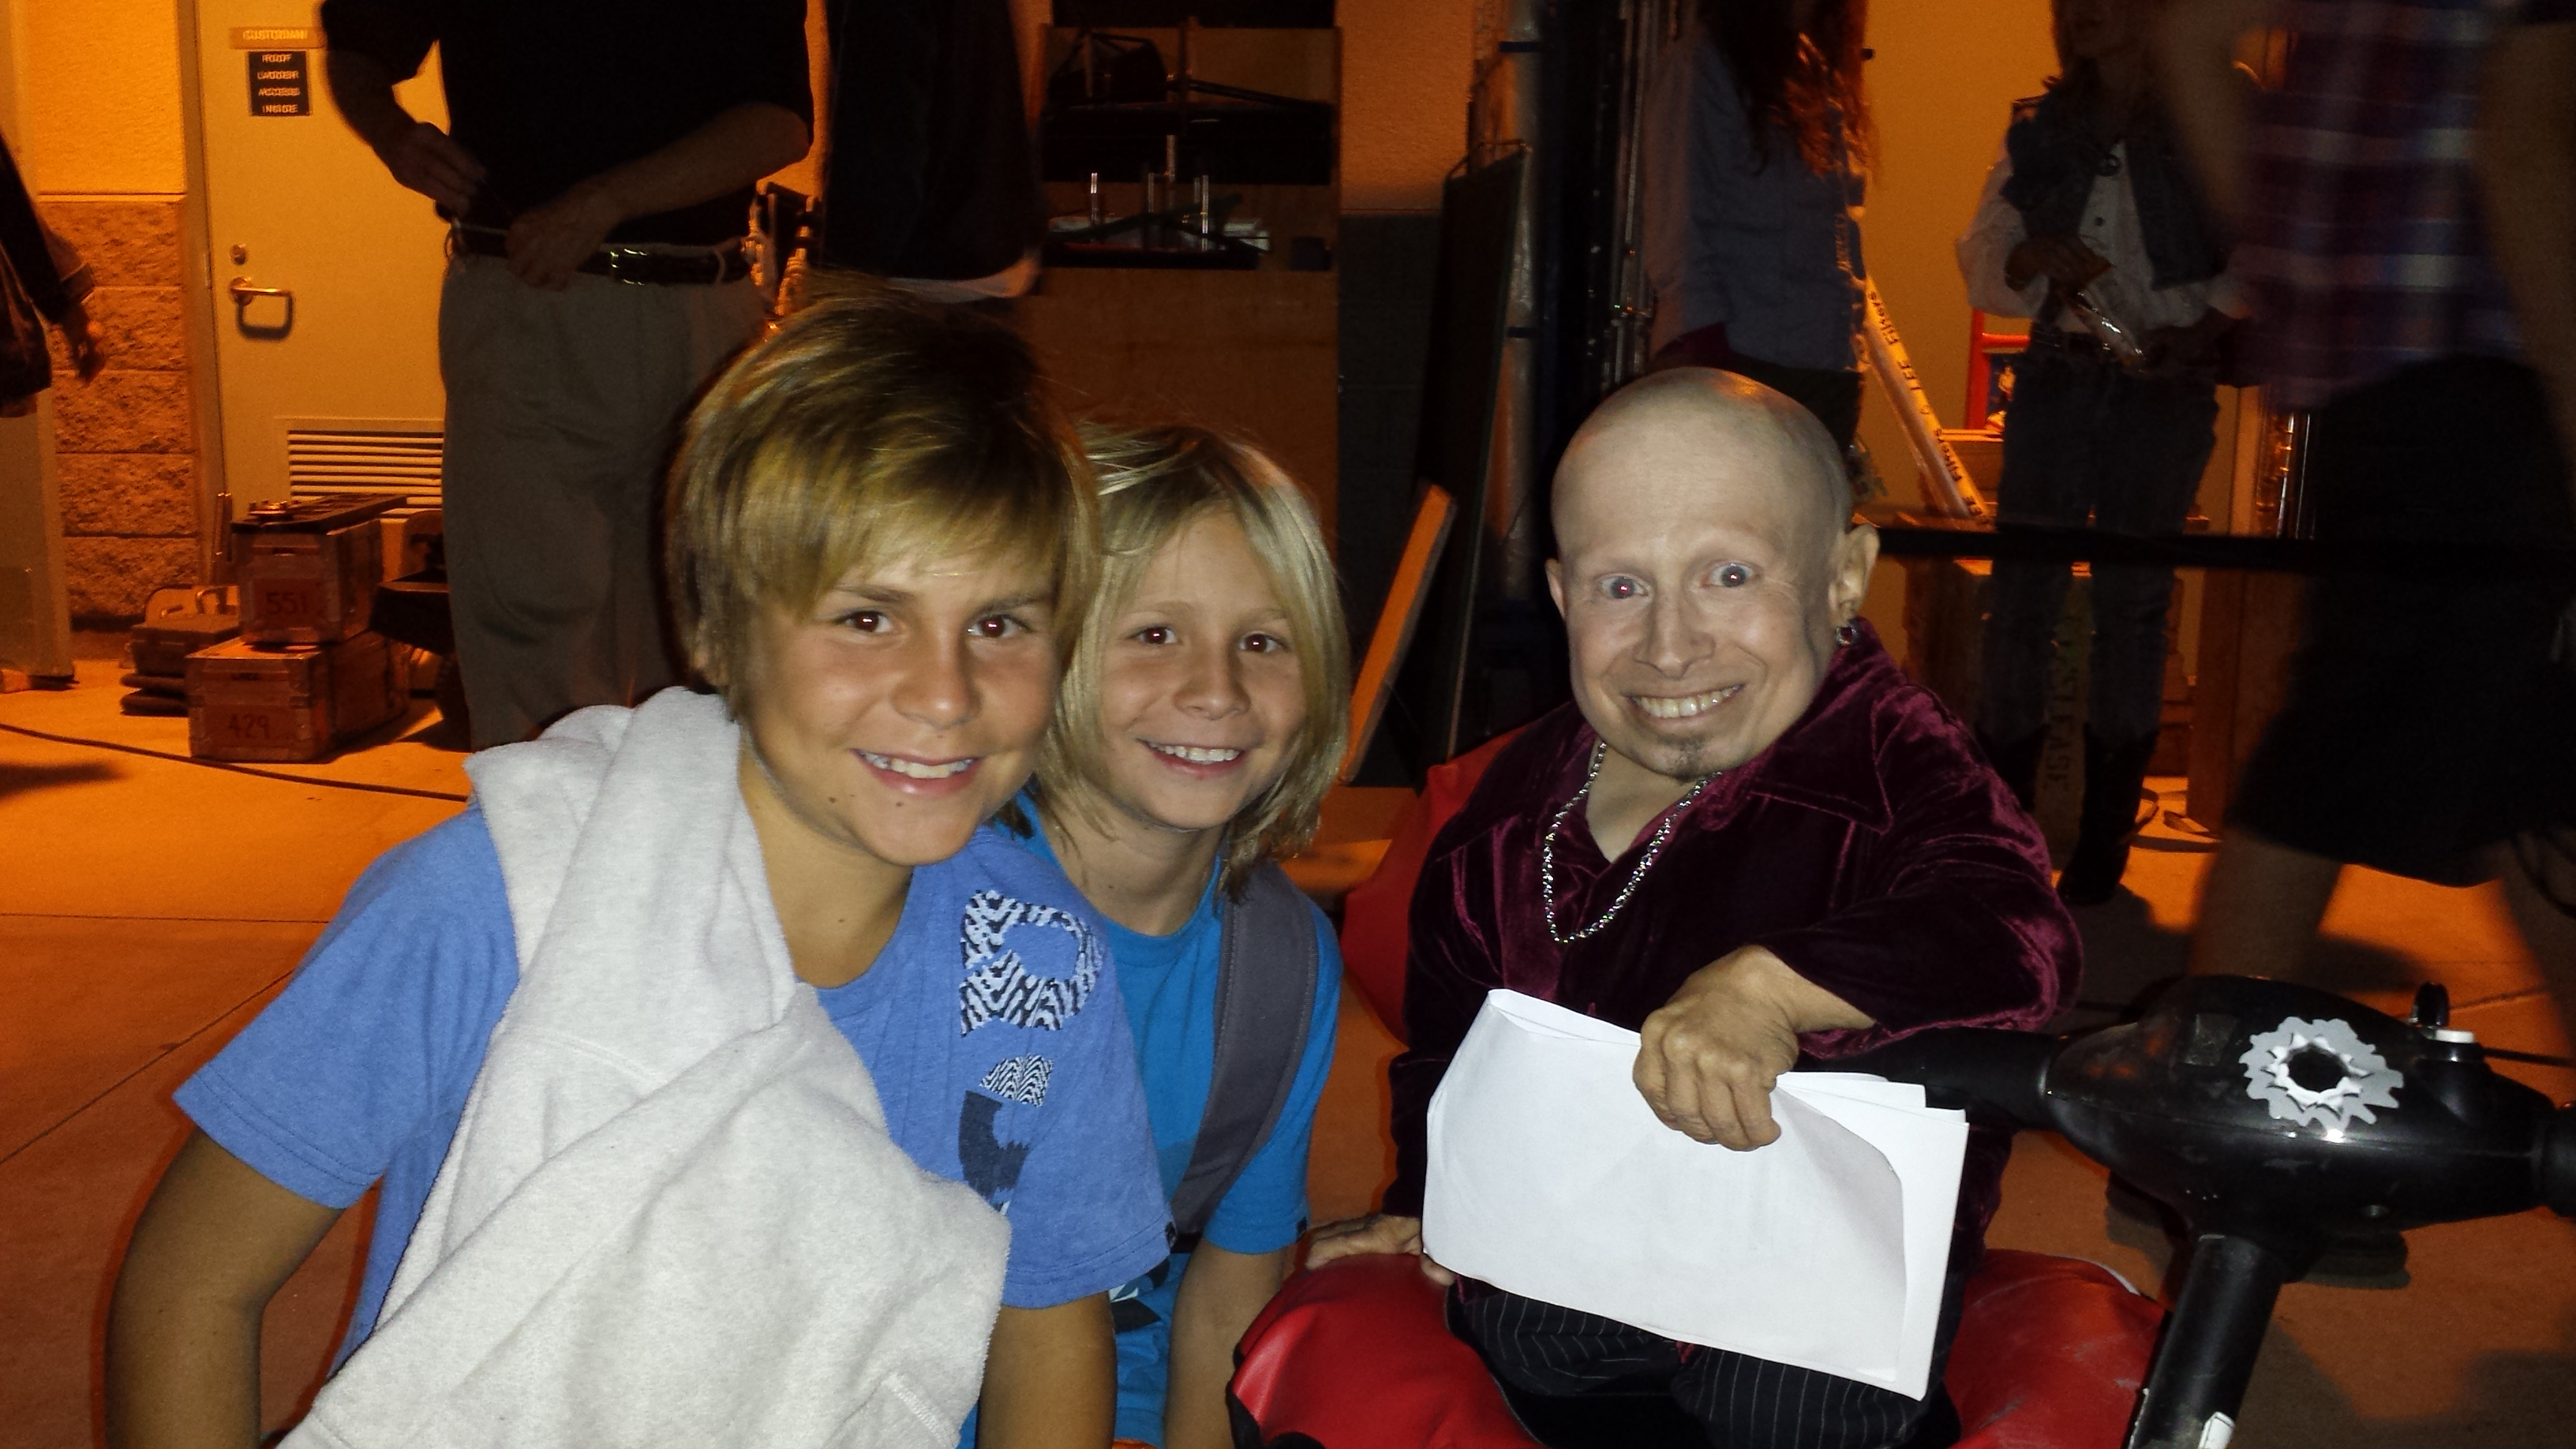 On set of The 420 Movie: Mary and Jane with Sterling and Orion Howard and Verne Troyer